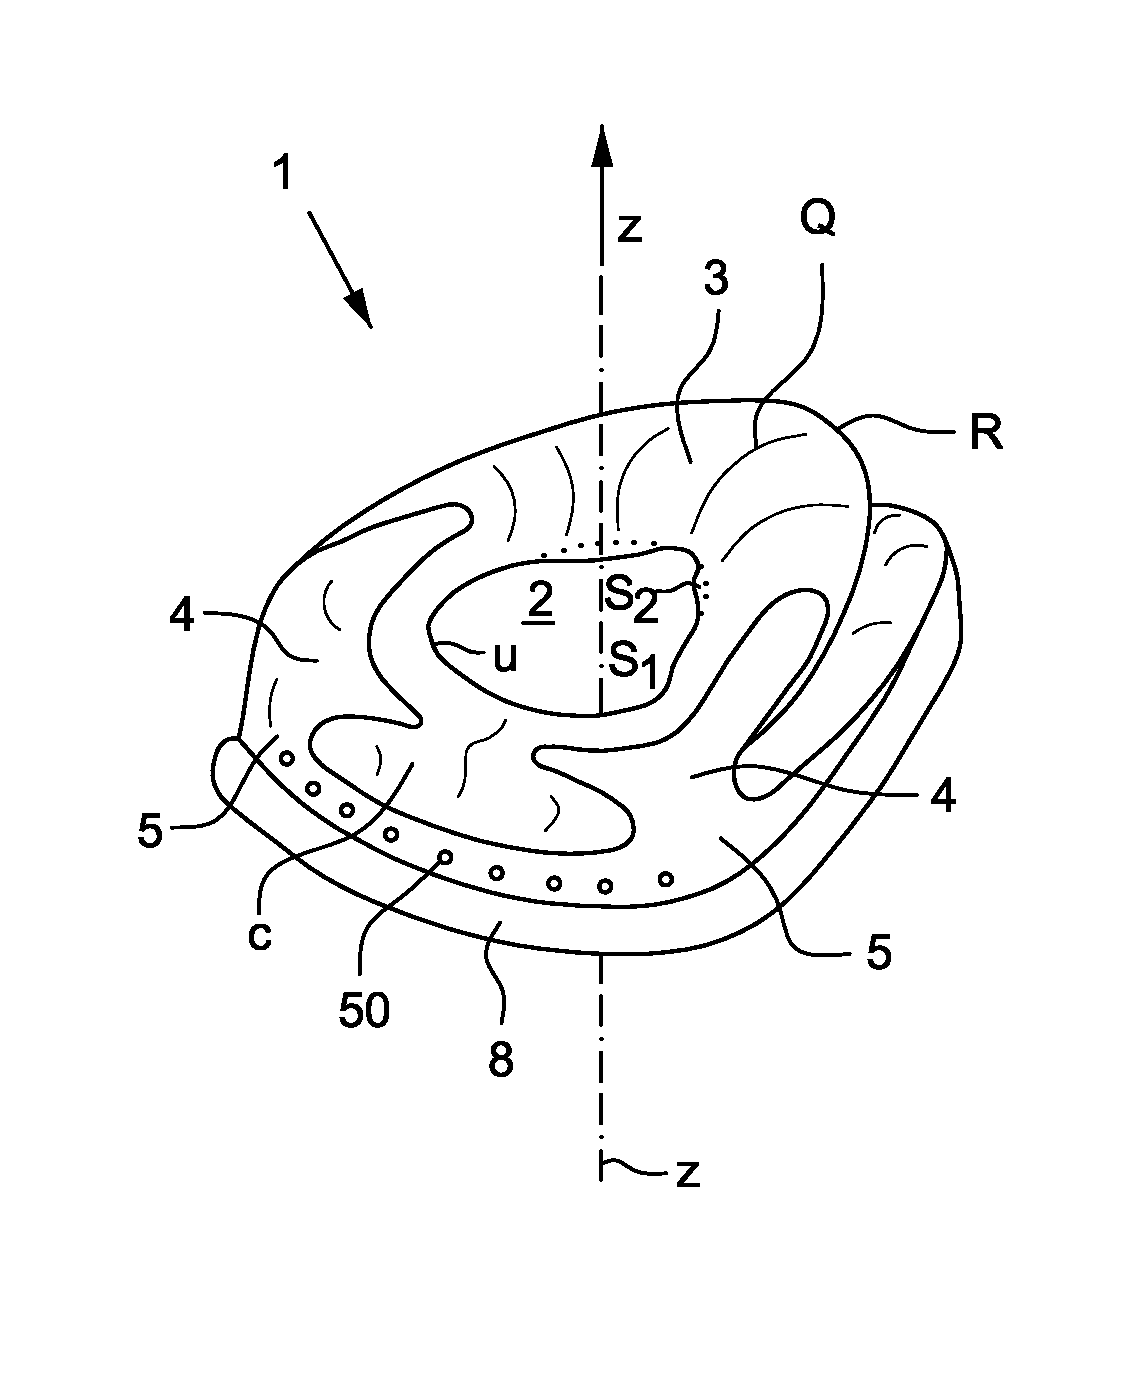 Breathing mask and a sealing lip device for a breathing mask